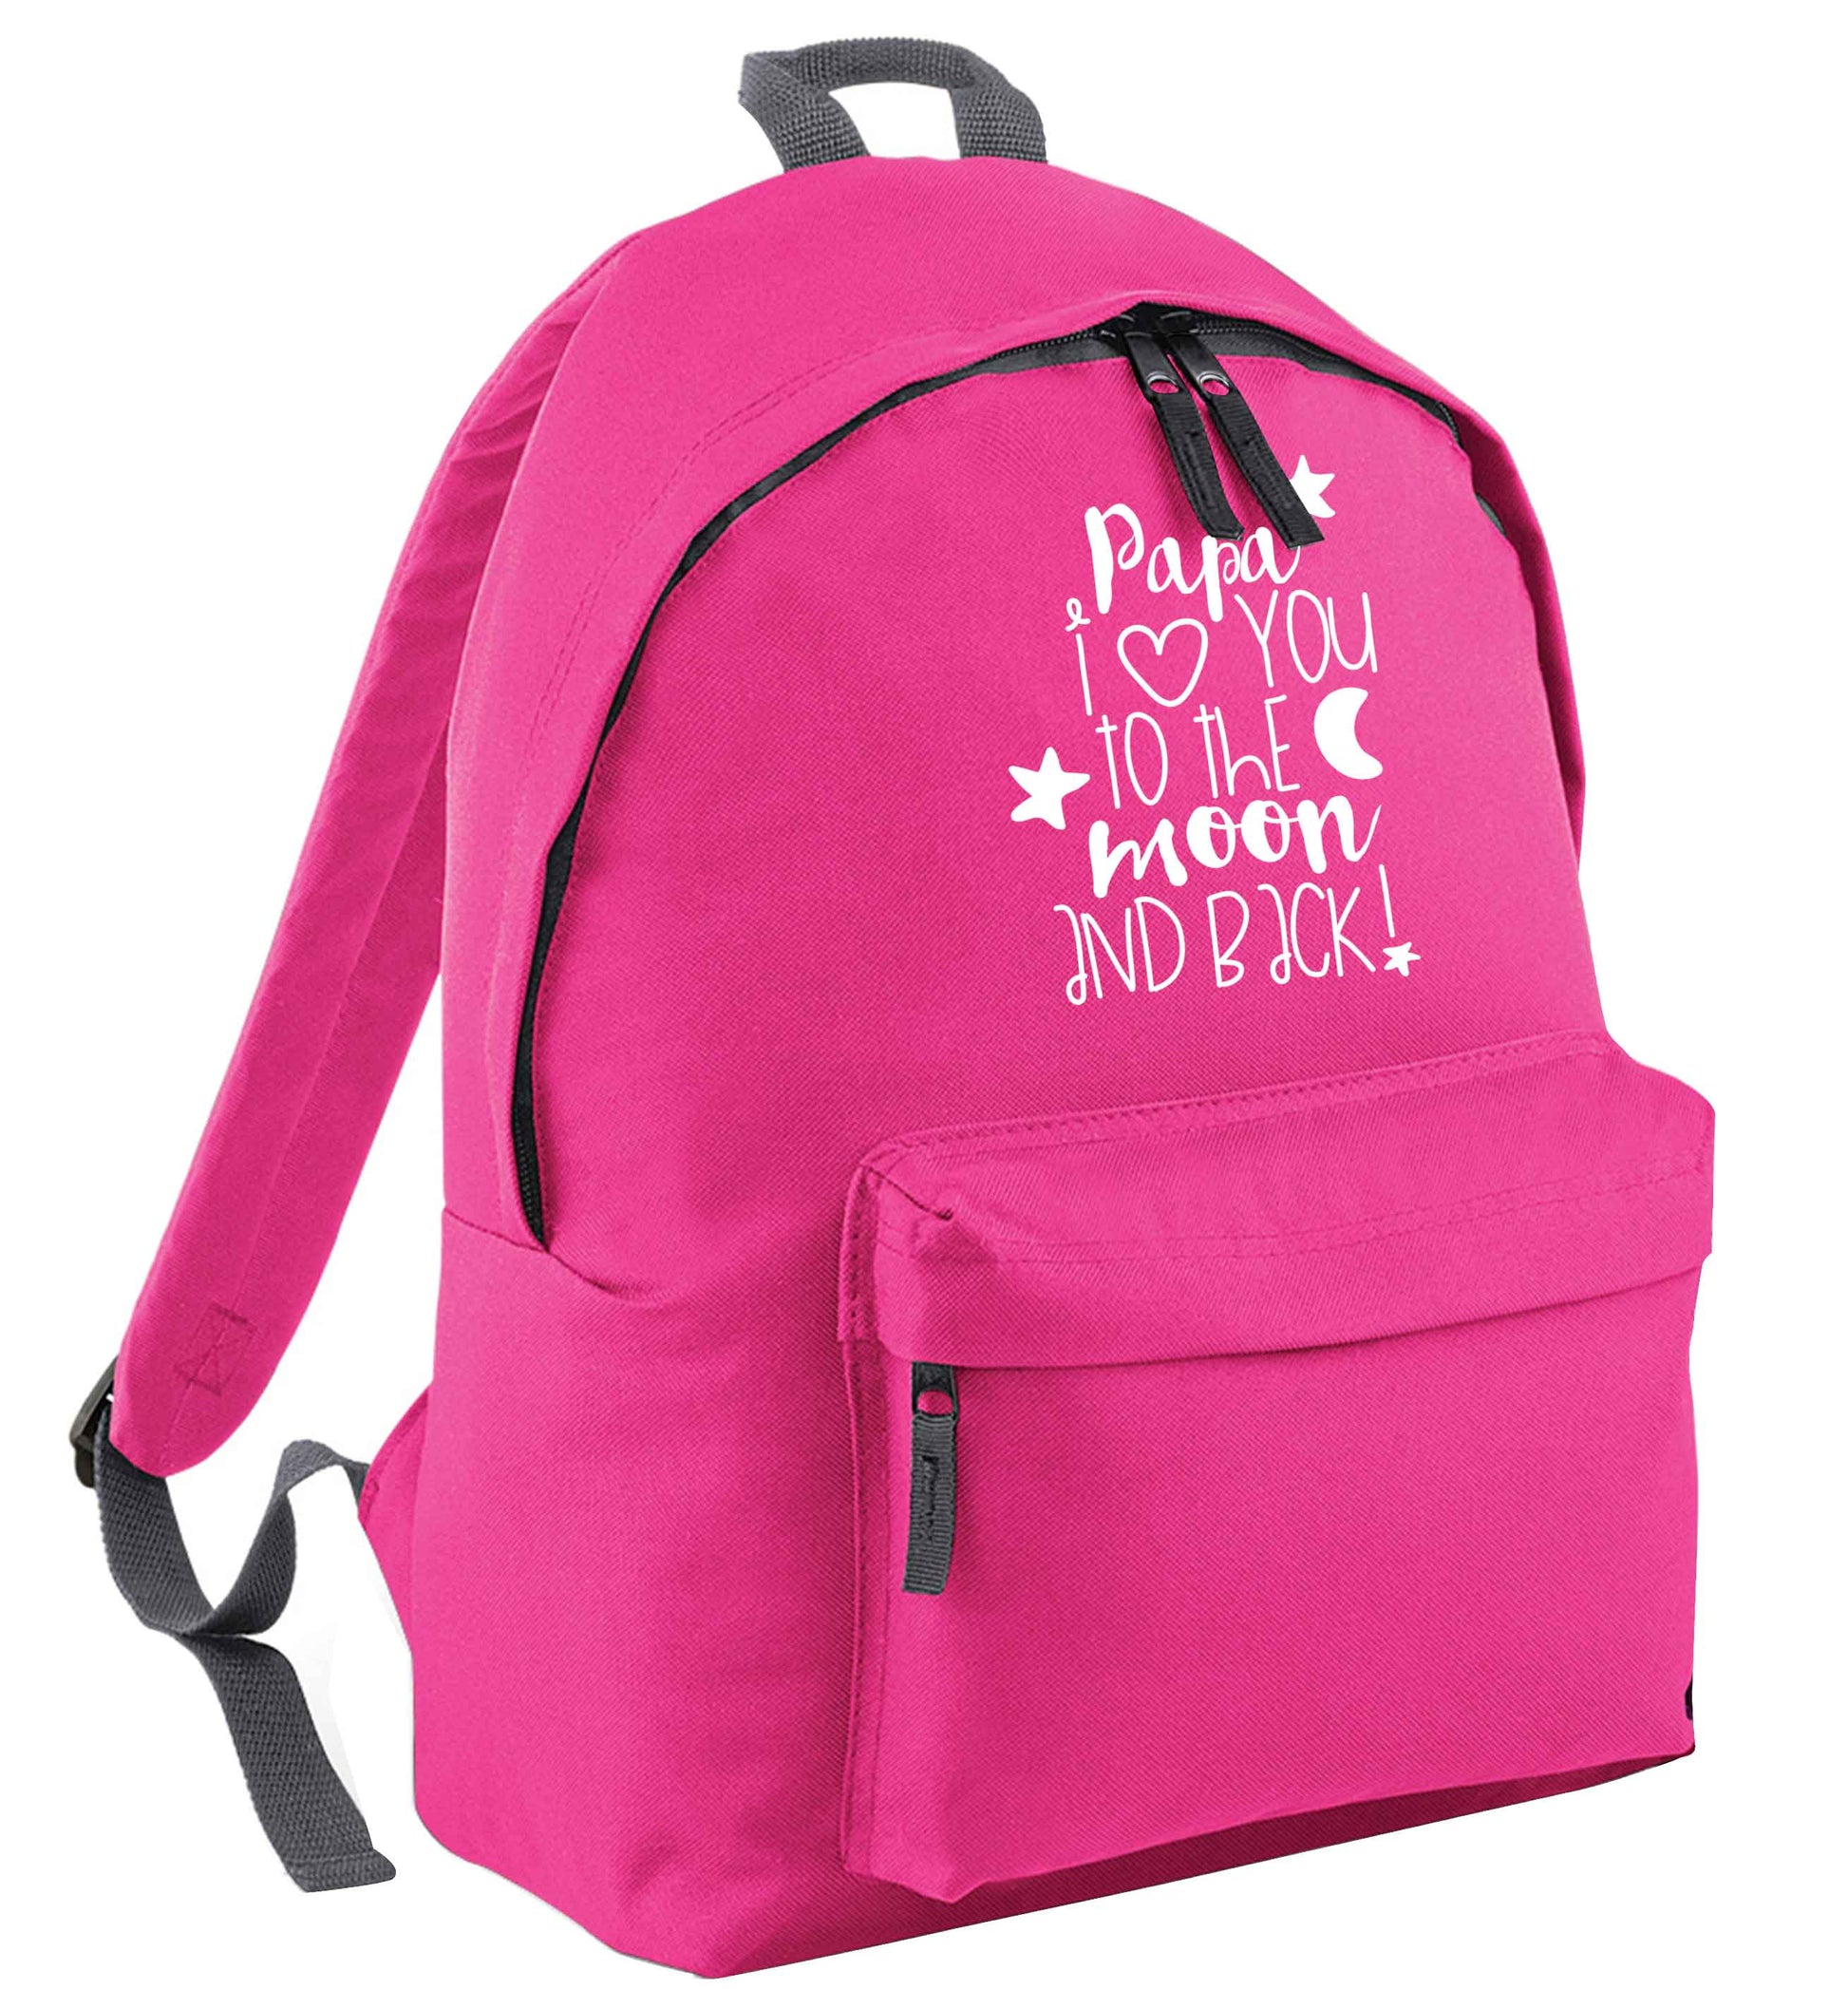 Papa I love you to the moon and back pink adults backpack